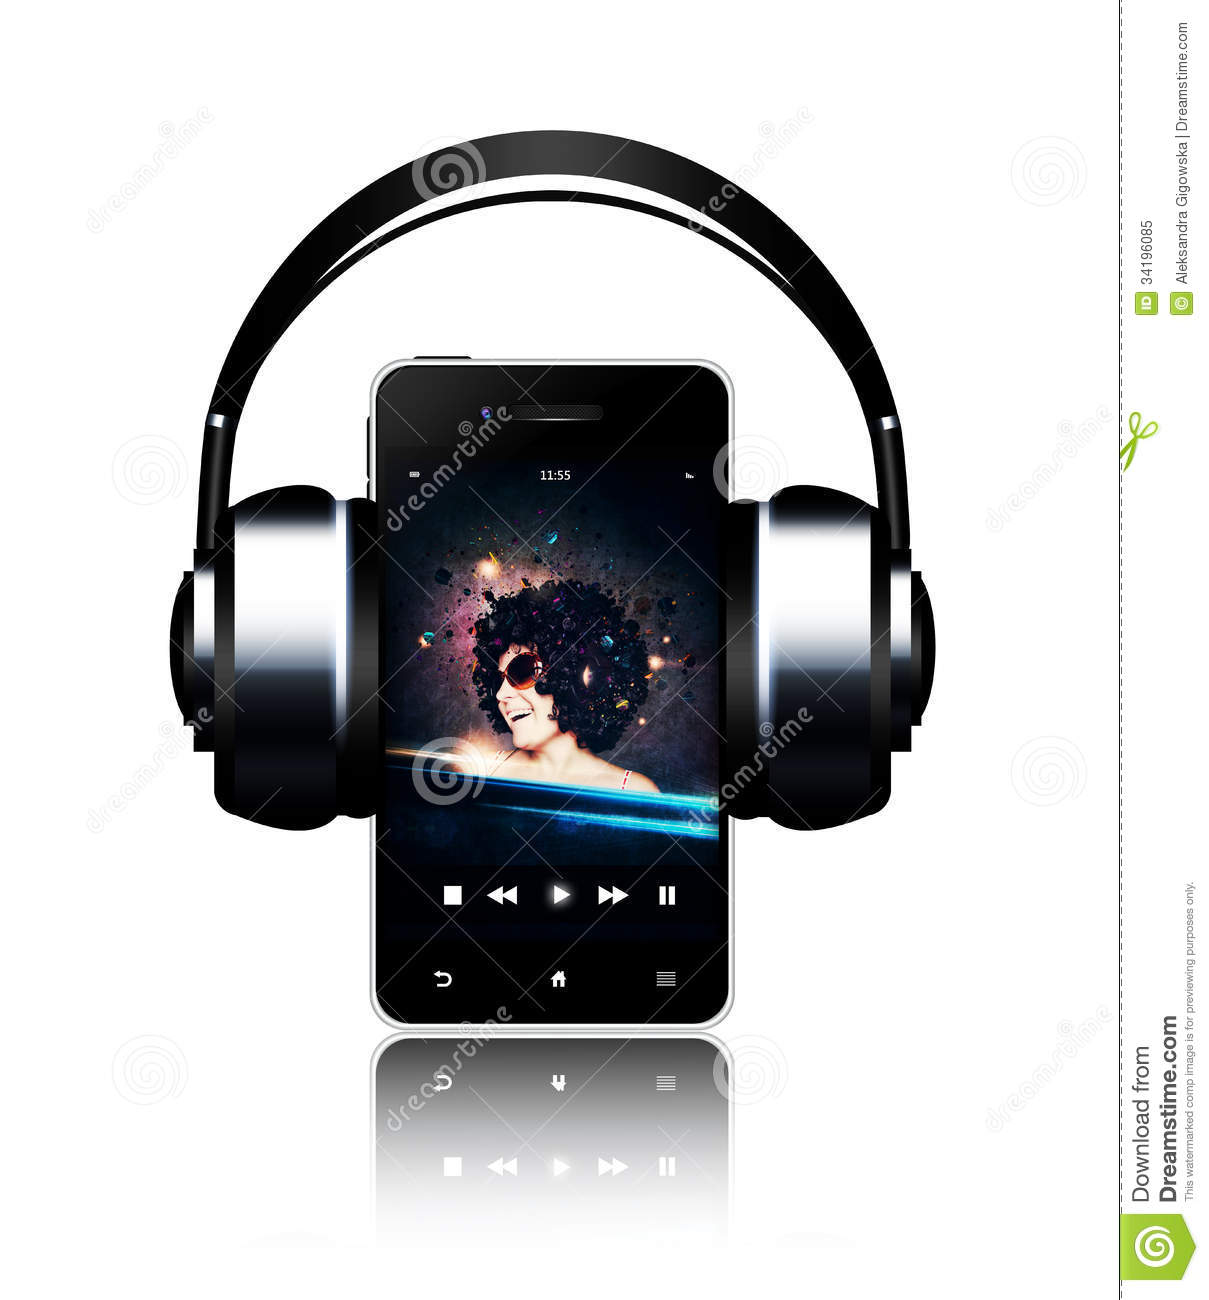 Download music to lg phone